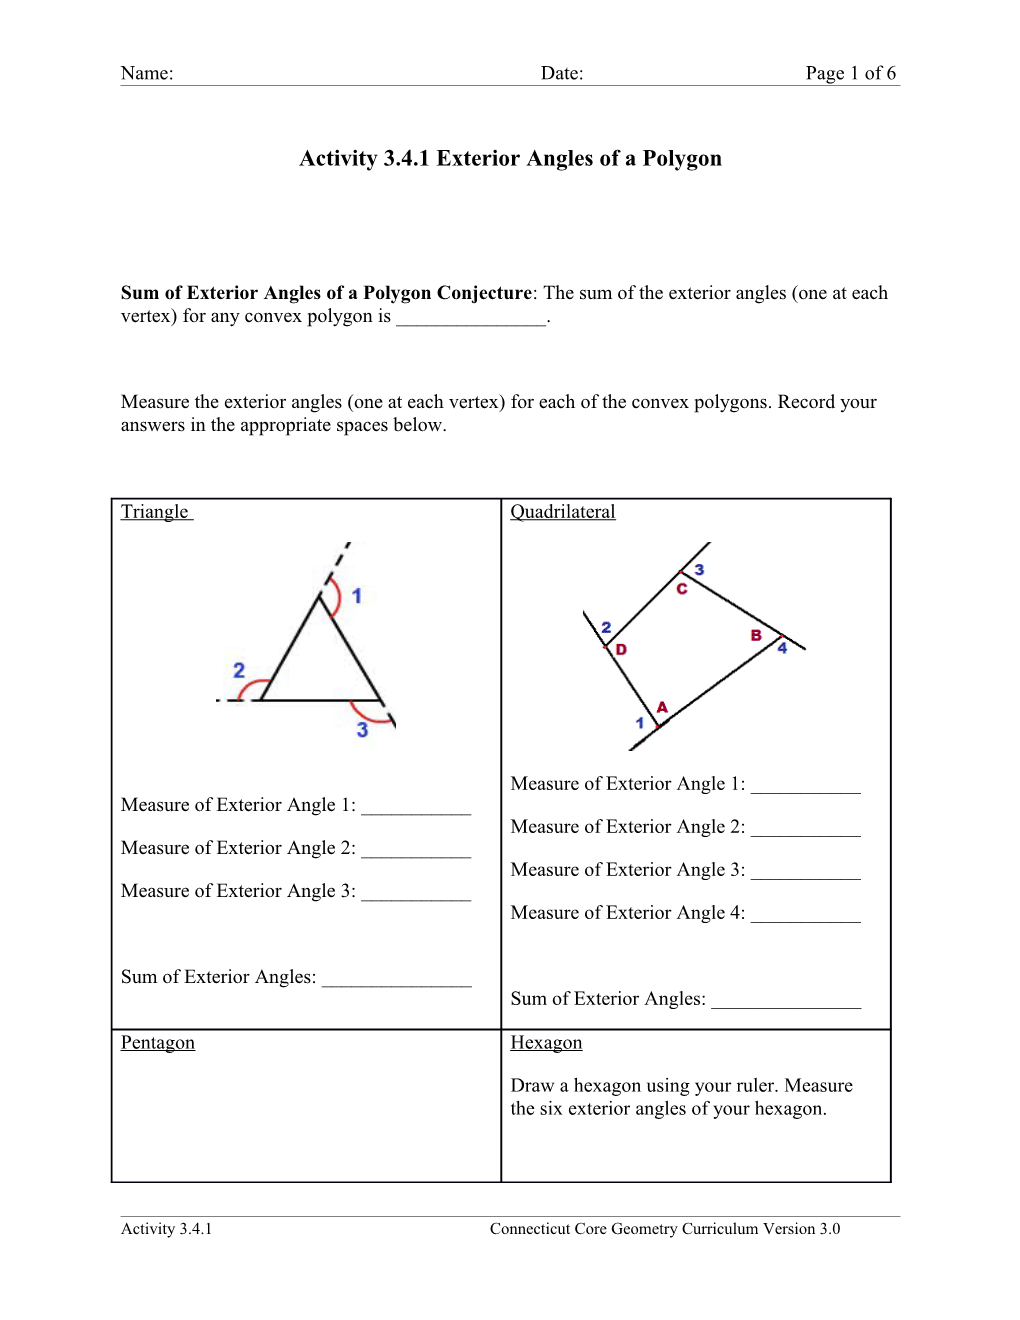 Activity 3.4.1 Exterior Angles of a Polygon